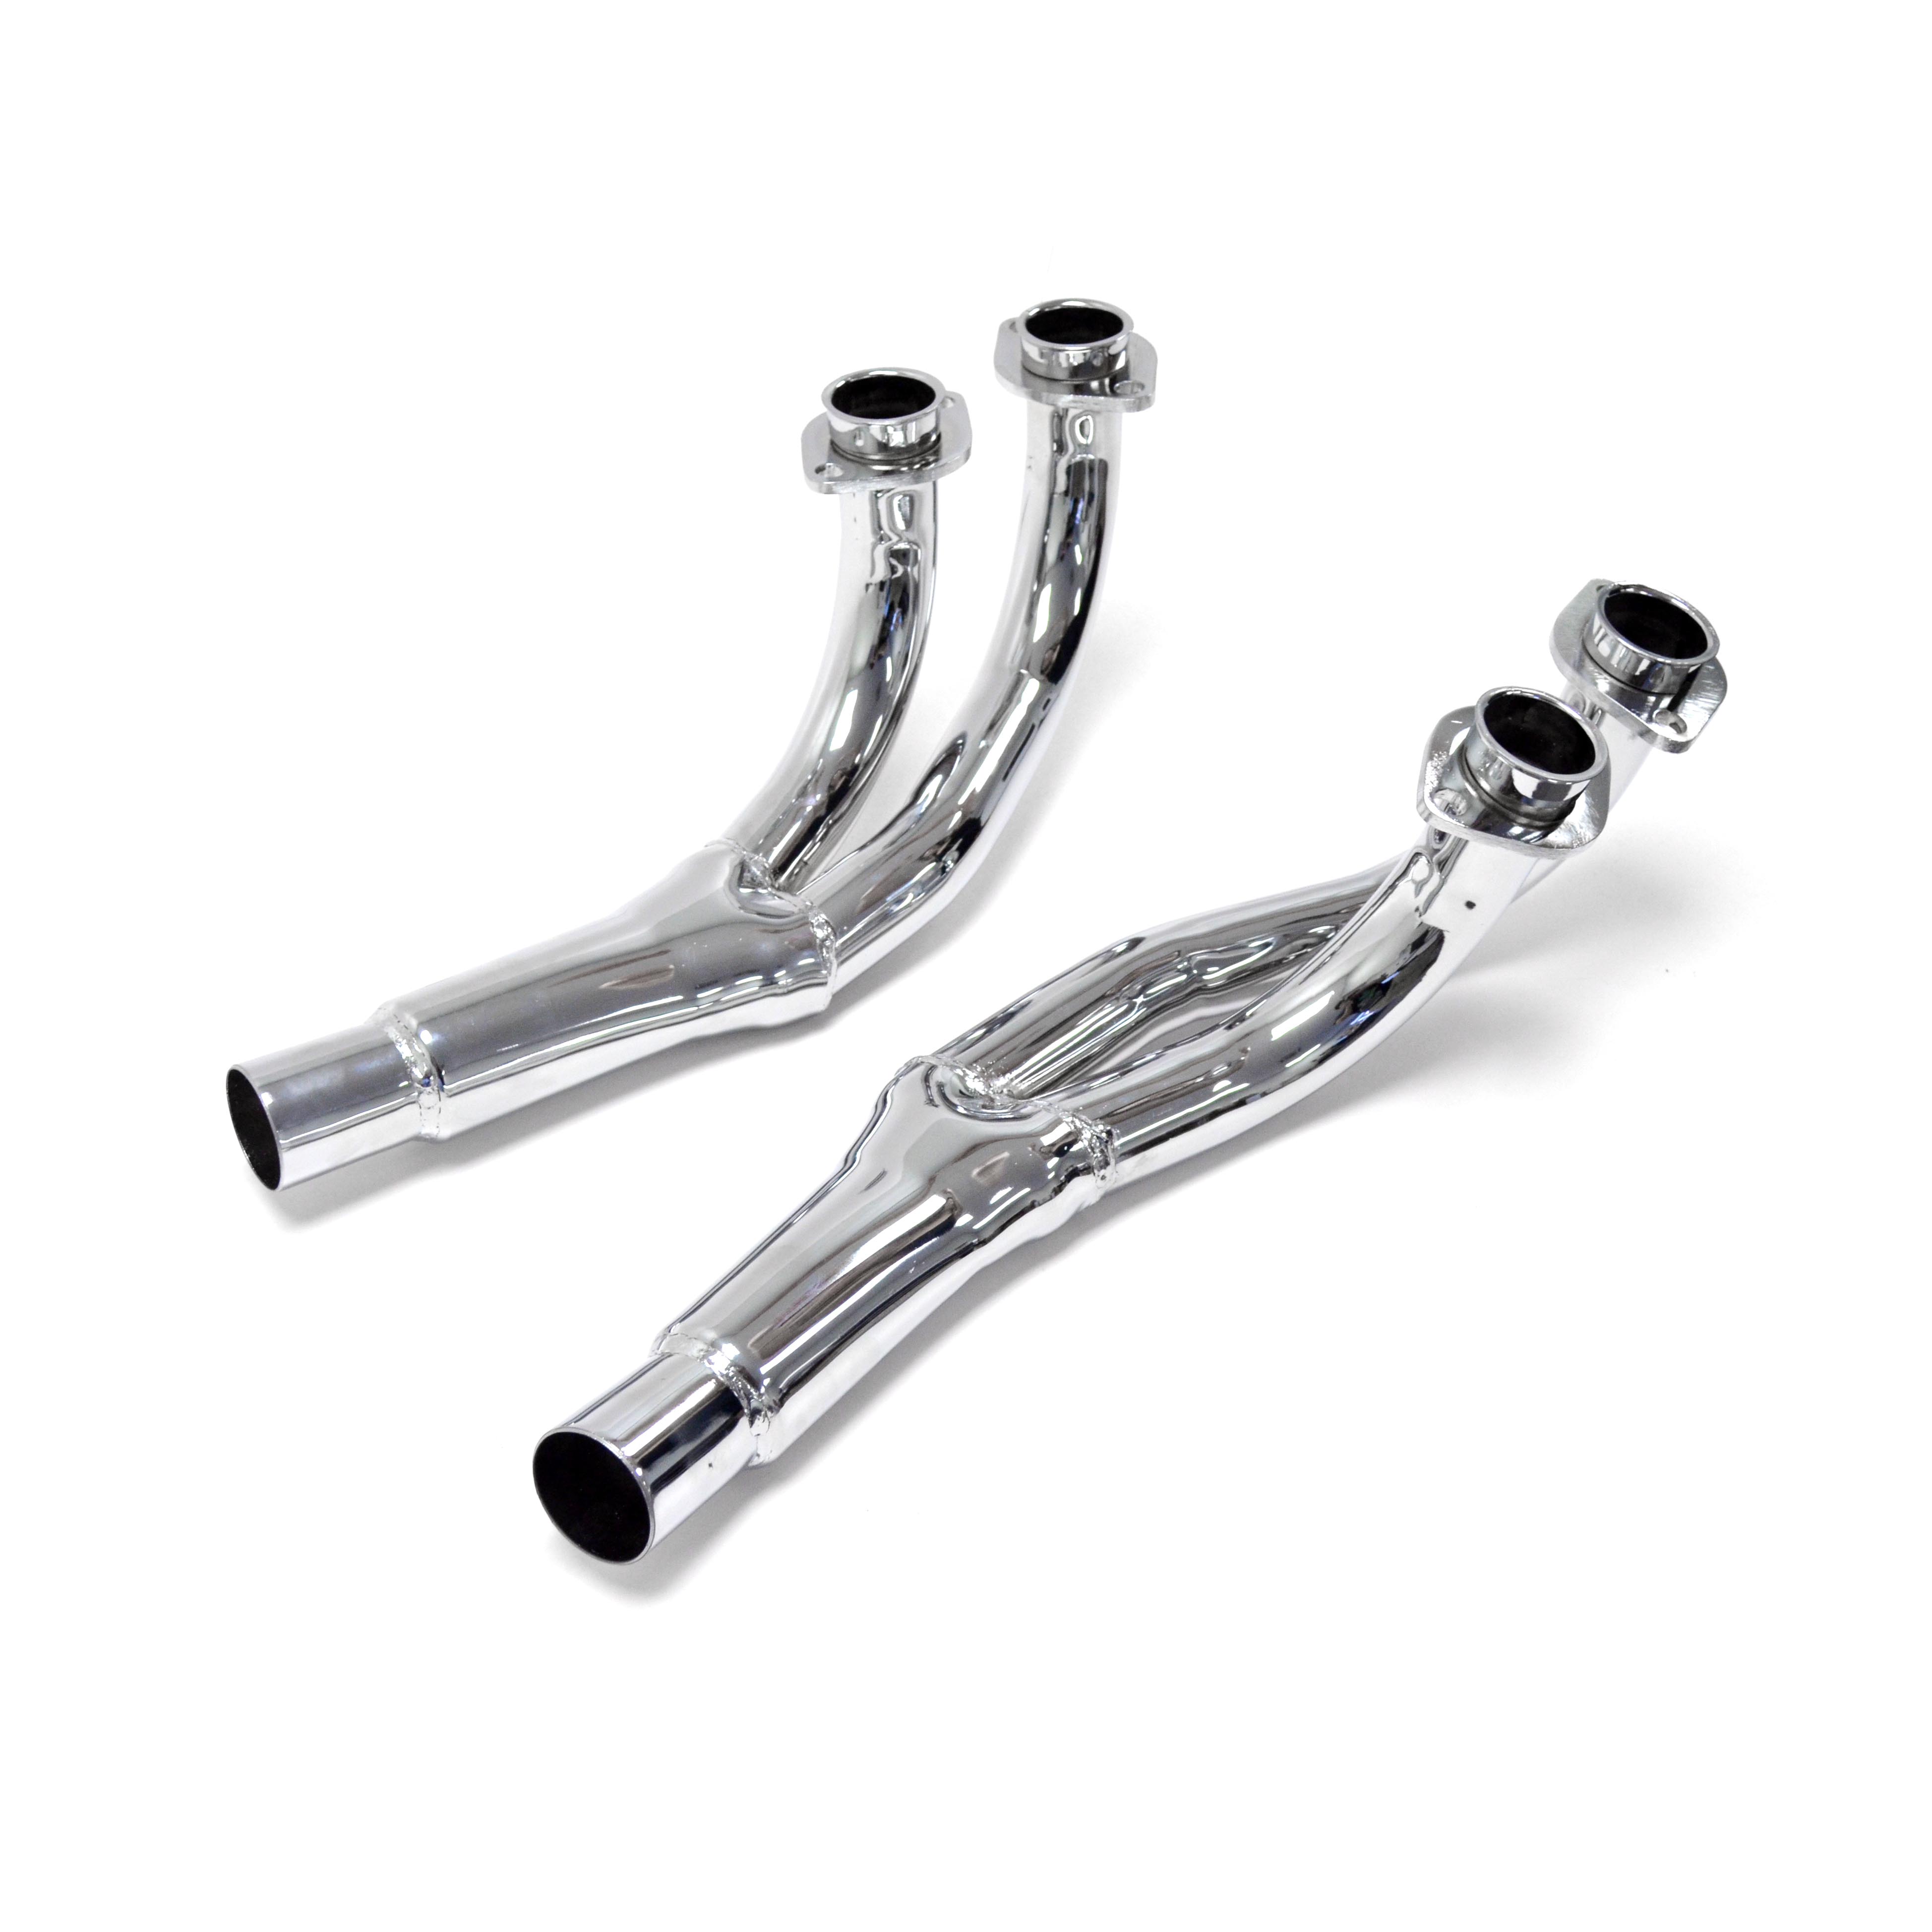 Honda goldwing exhaust pipes #7